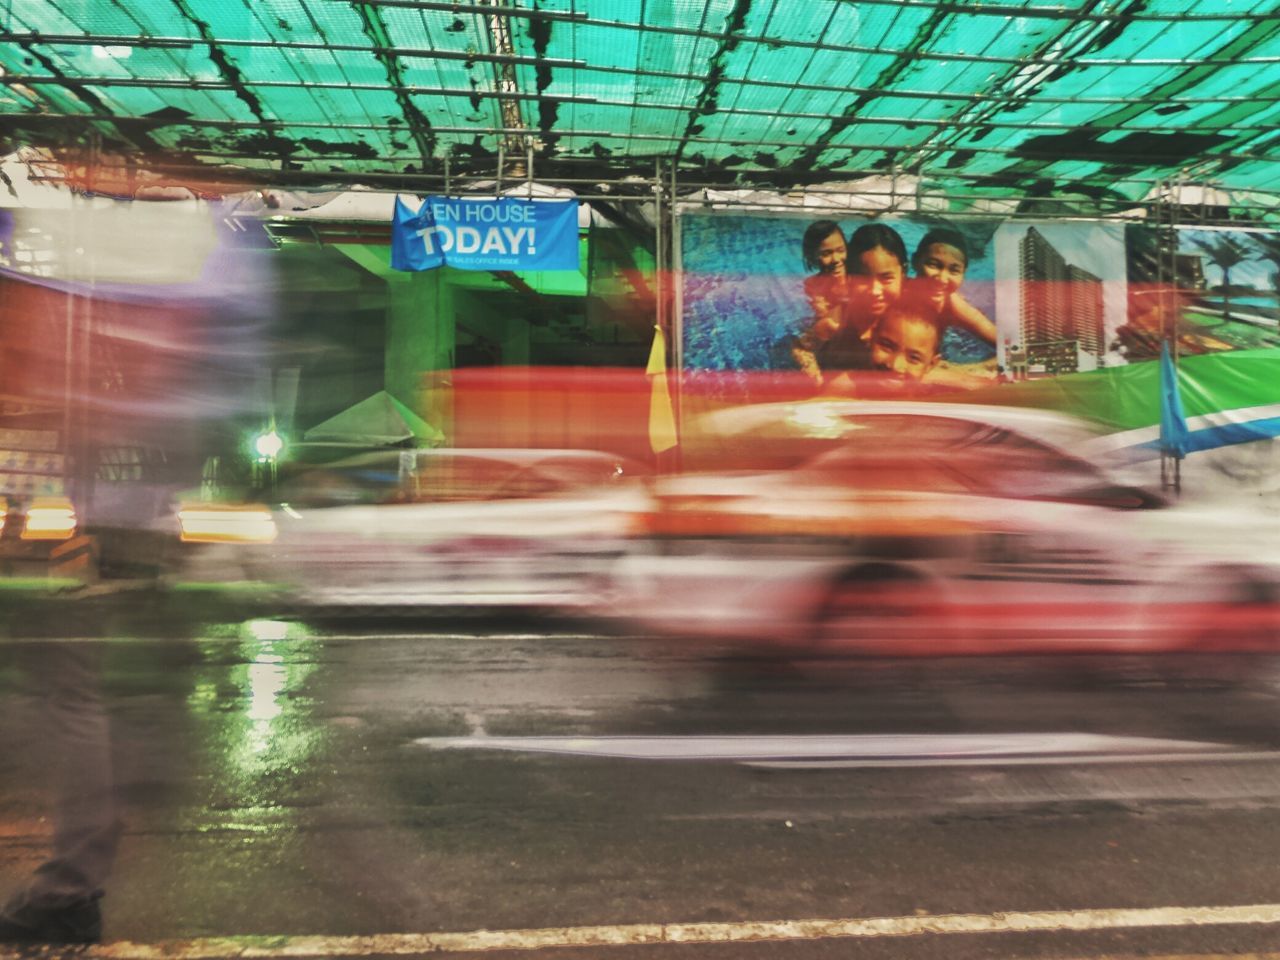 text, transportation, western script, communication, built structure, architecture, graffiti, information sign, road, street, glass - material, city, mode of transport, blurred motion, transparent, building exterior, illuminated, public transportation, indoors, road marking